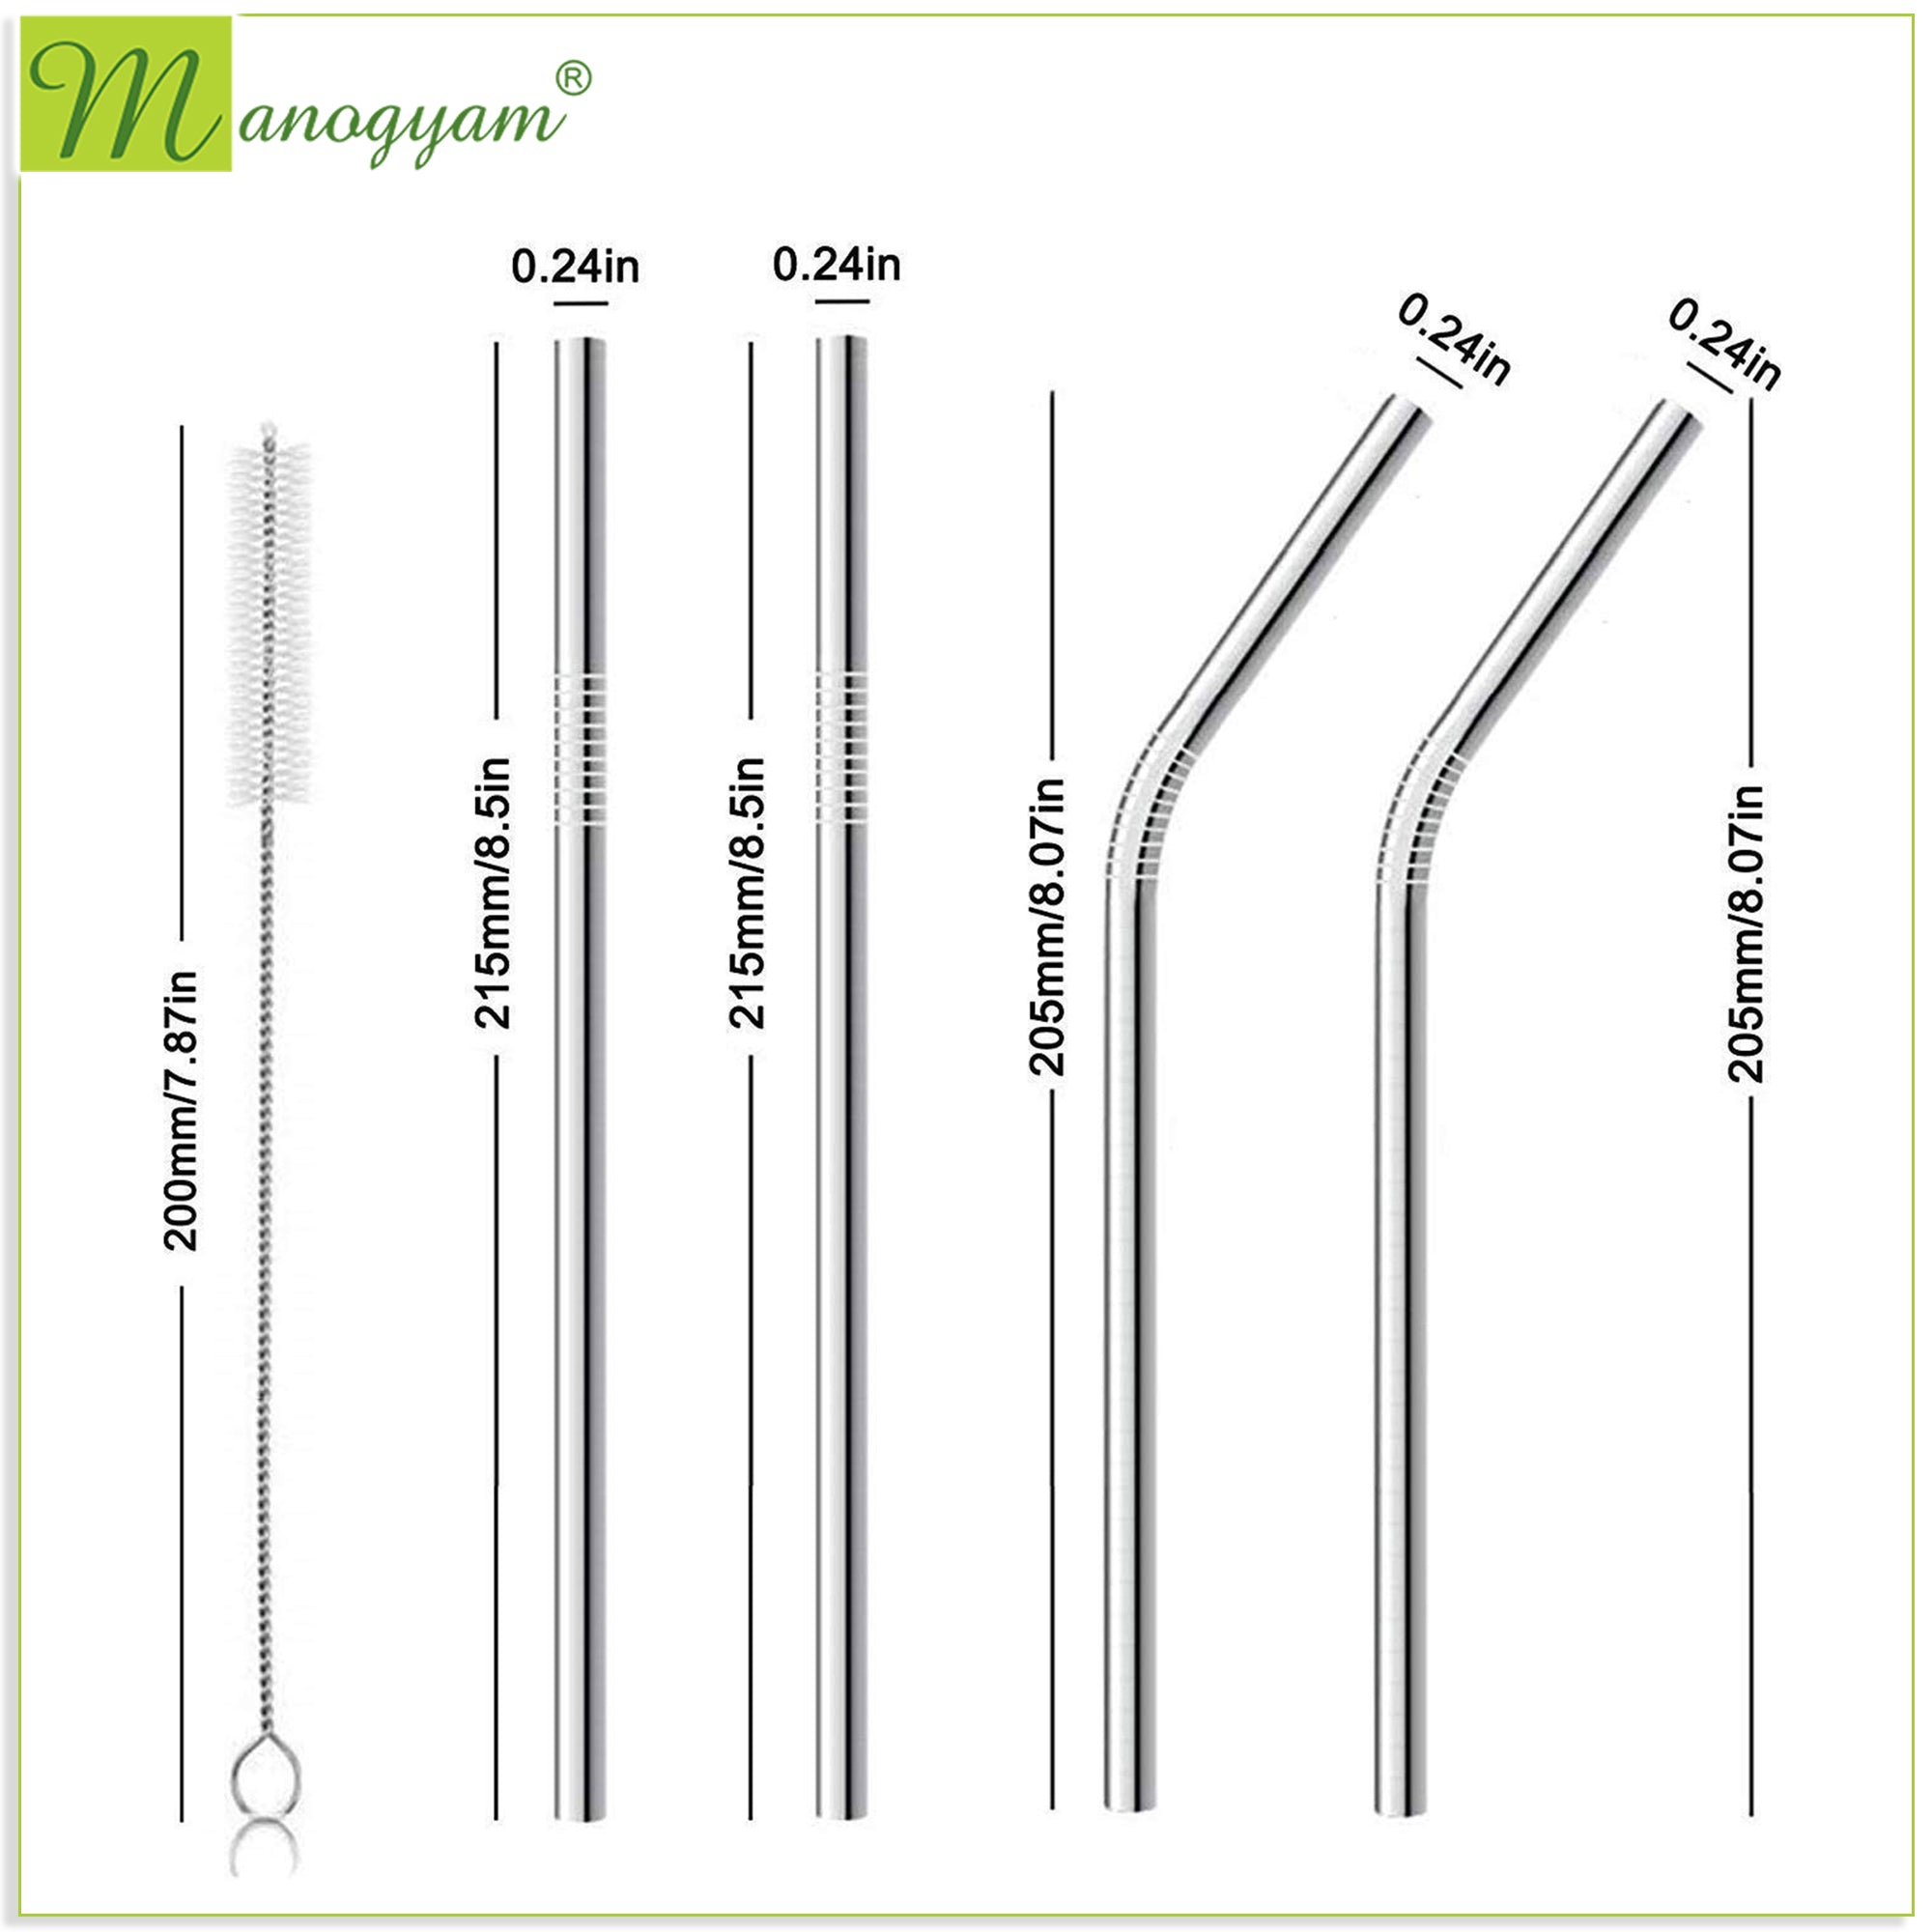 Manogyam RevoSteel Straws: Sustainable Stainless Steel Straws for Eco-Conscious Sipping